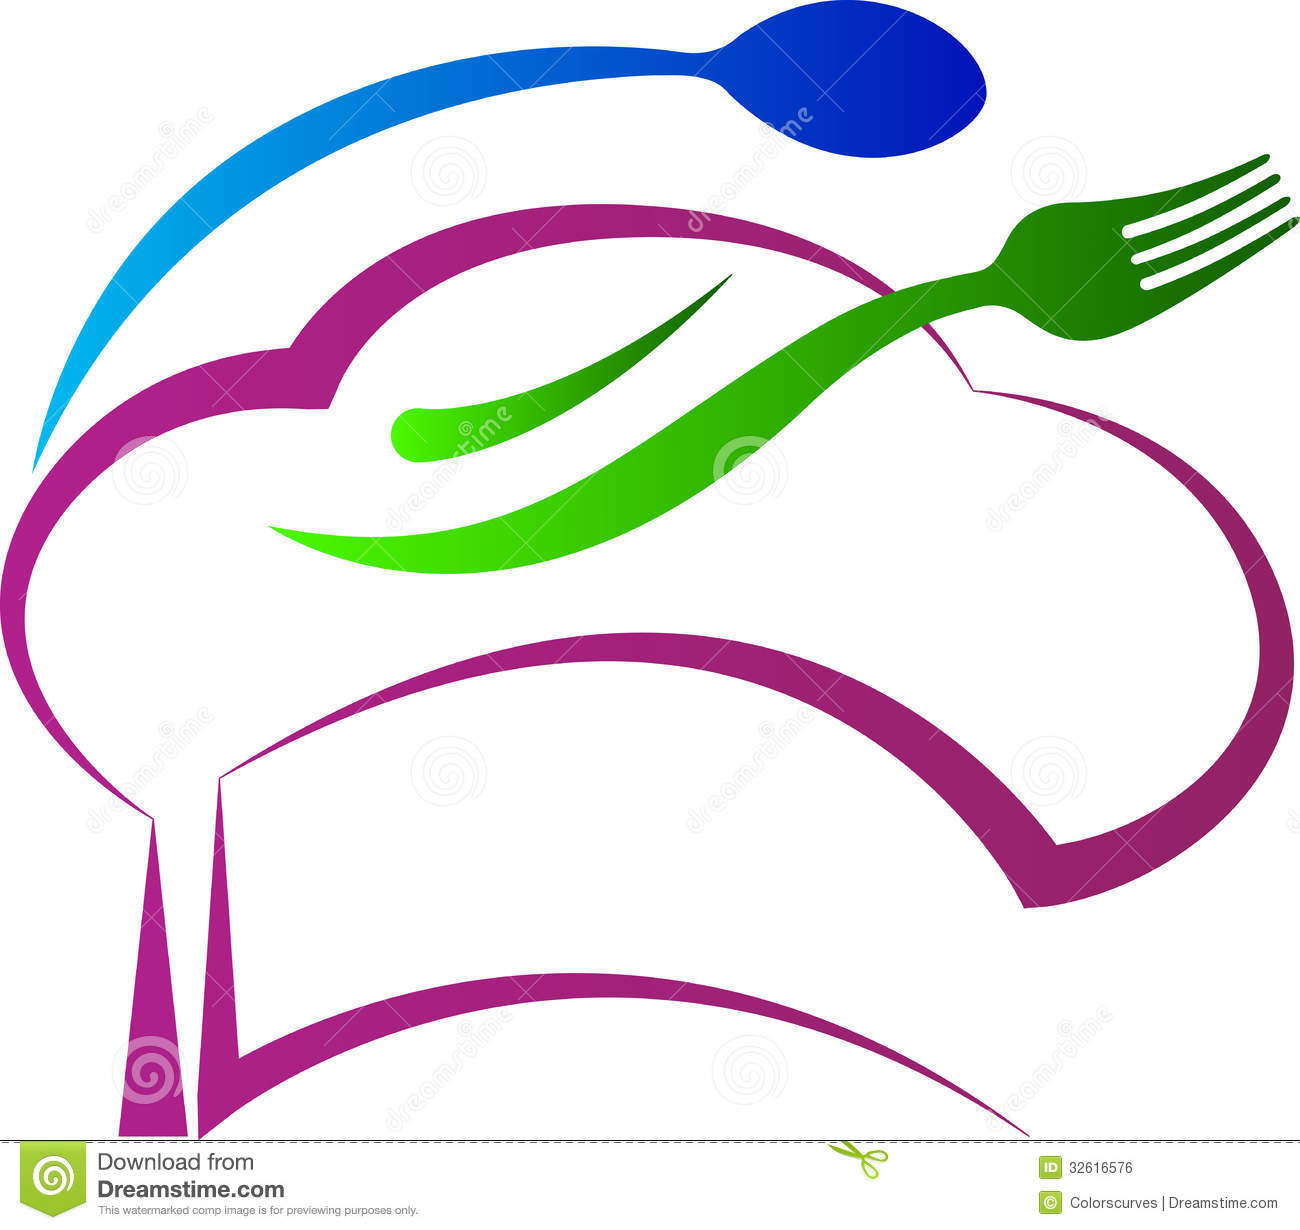 free chef hat clipart - photo #27